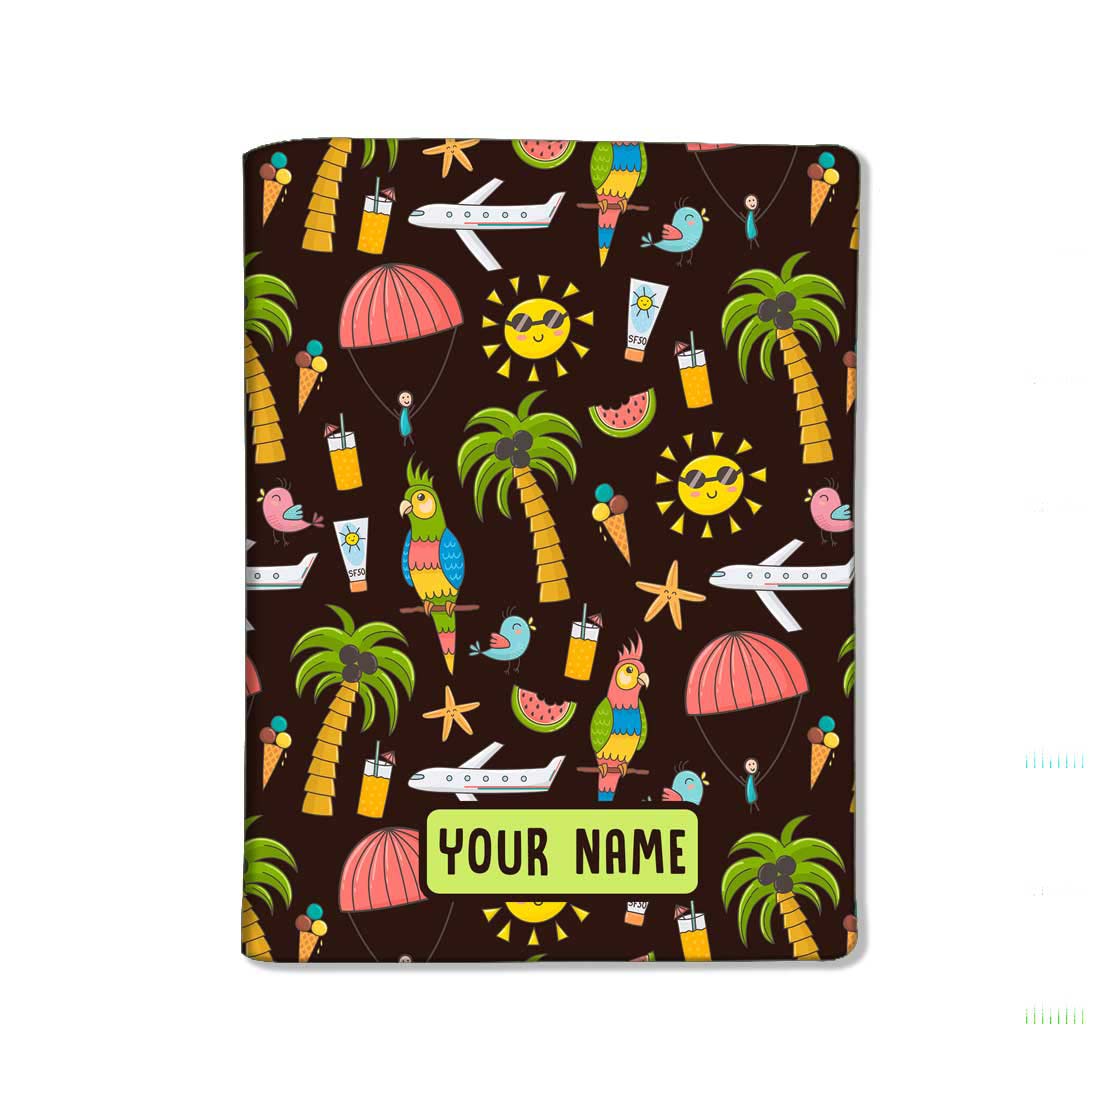 Customized Kids Design Passport Cover Luggage Tag Set - Summer Time Nutcase